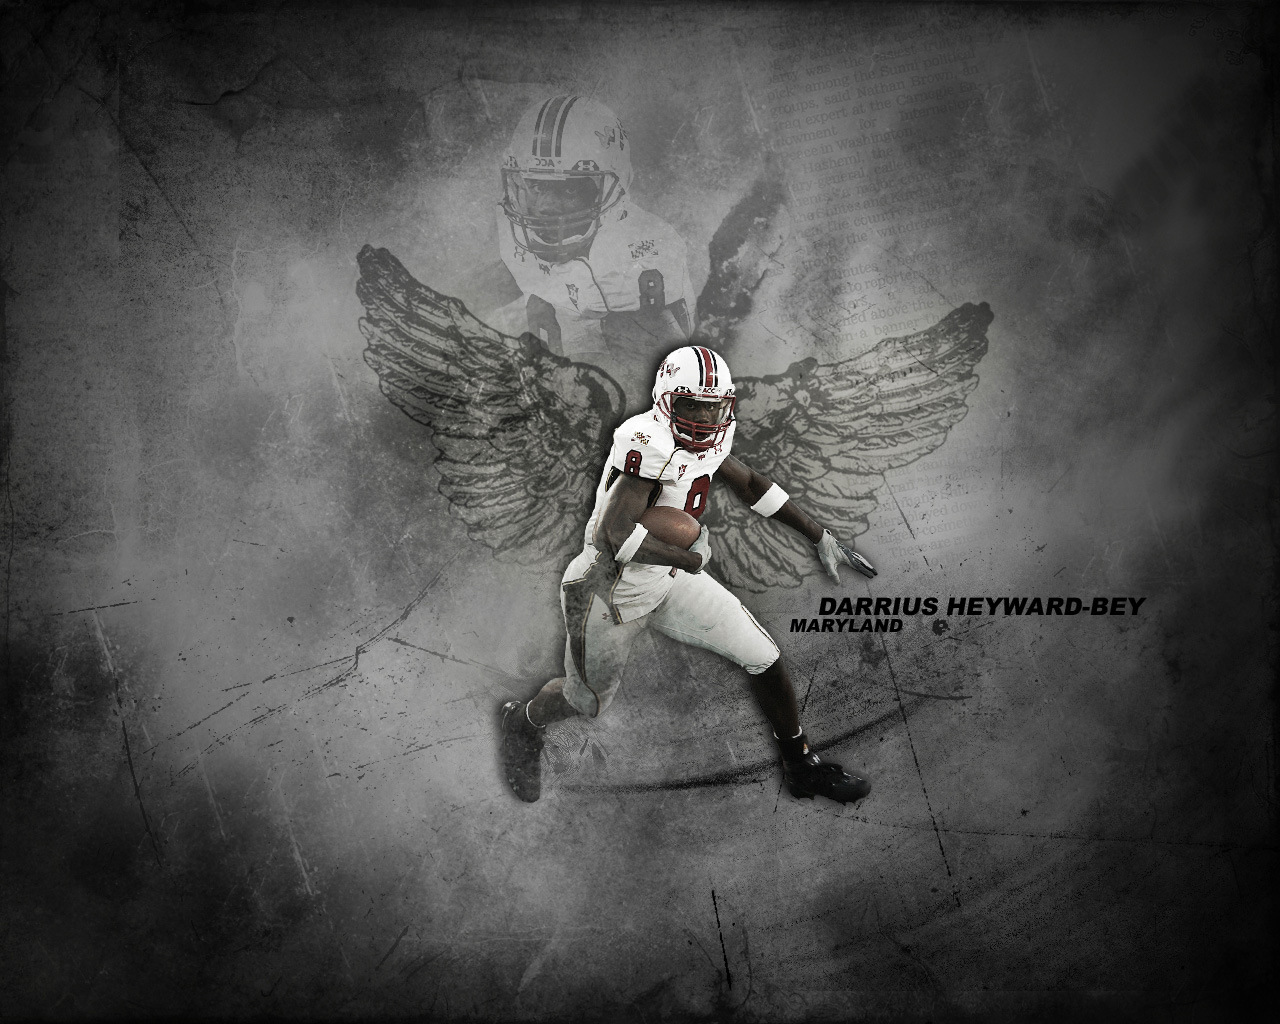 You Like This Oakland Raiders Wallpaper HD As Much We Do